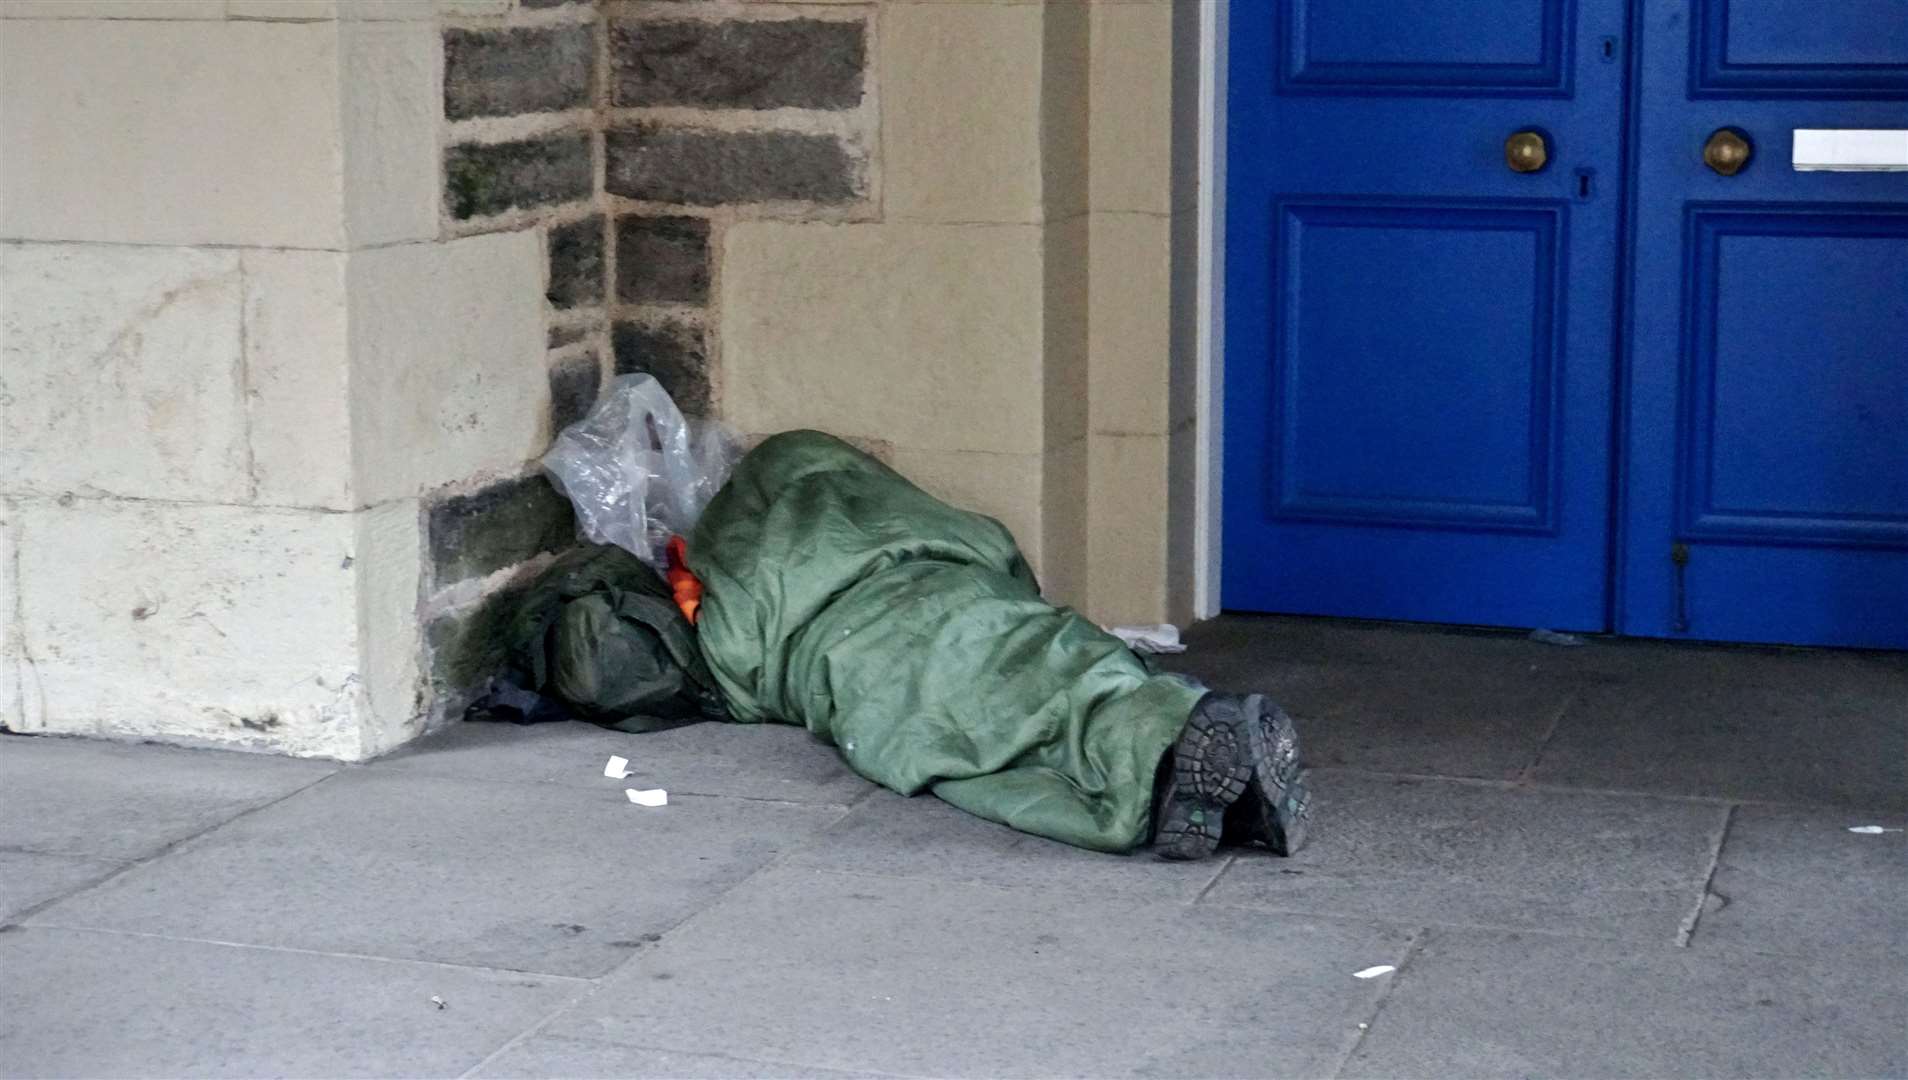 The Great Tommy Sleep Out aims to help homeless veterans. 'We all salute those who have no choice but to sleep outside,' said charity event organiser Phil Boardman. Picture: DGS